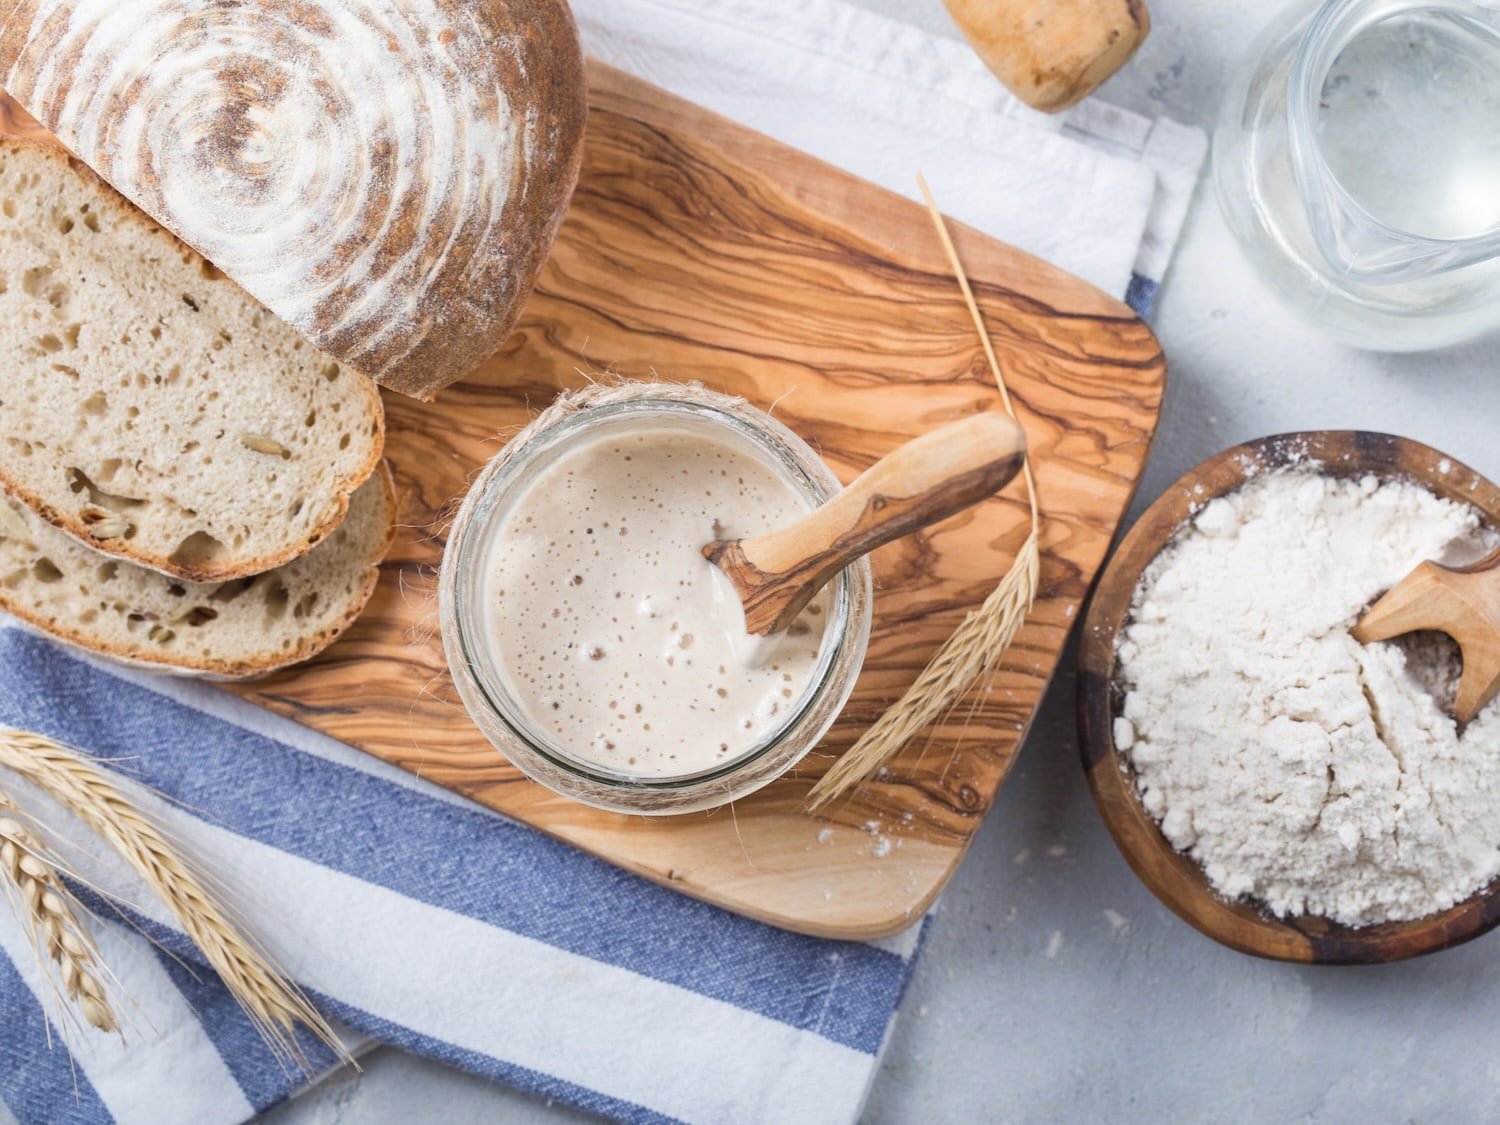 Overhead shot of sourdough starter with wooden spoon in glass bowl on a wooden cutting board. Sourdough boule sliced alongside the bowl. Dish of dry flour beside the cutting board. Scene is decorated by shaft of wheat.